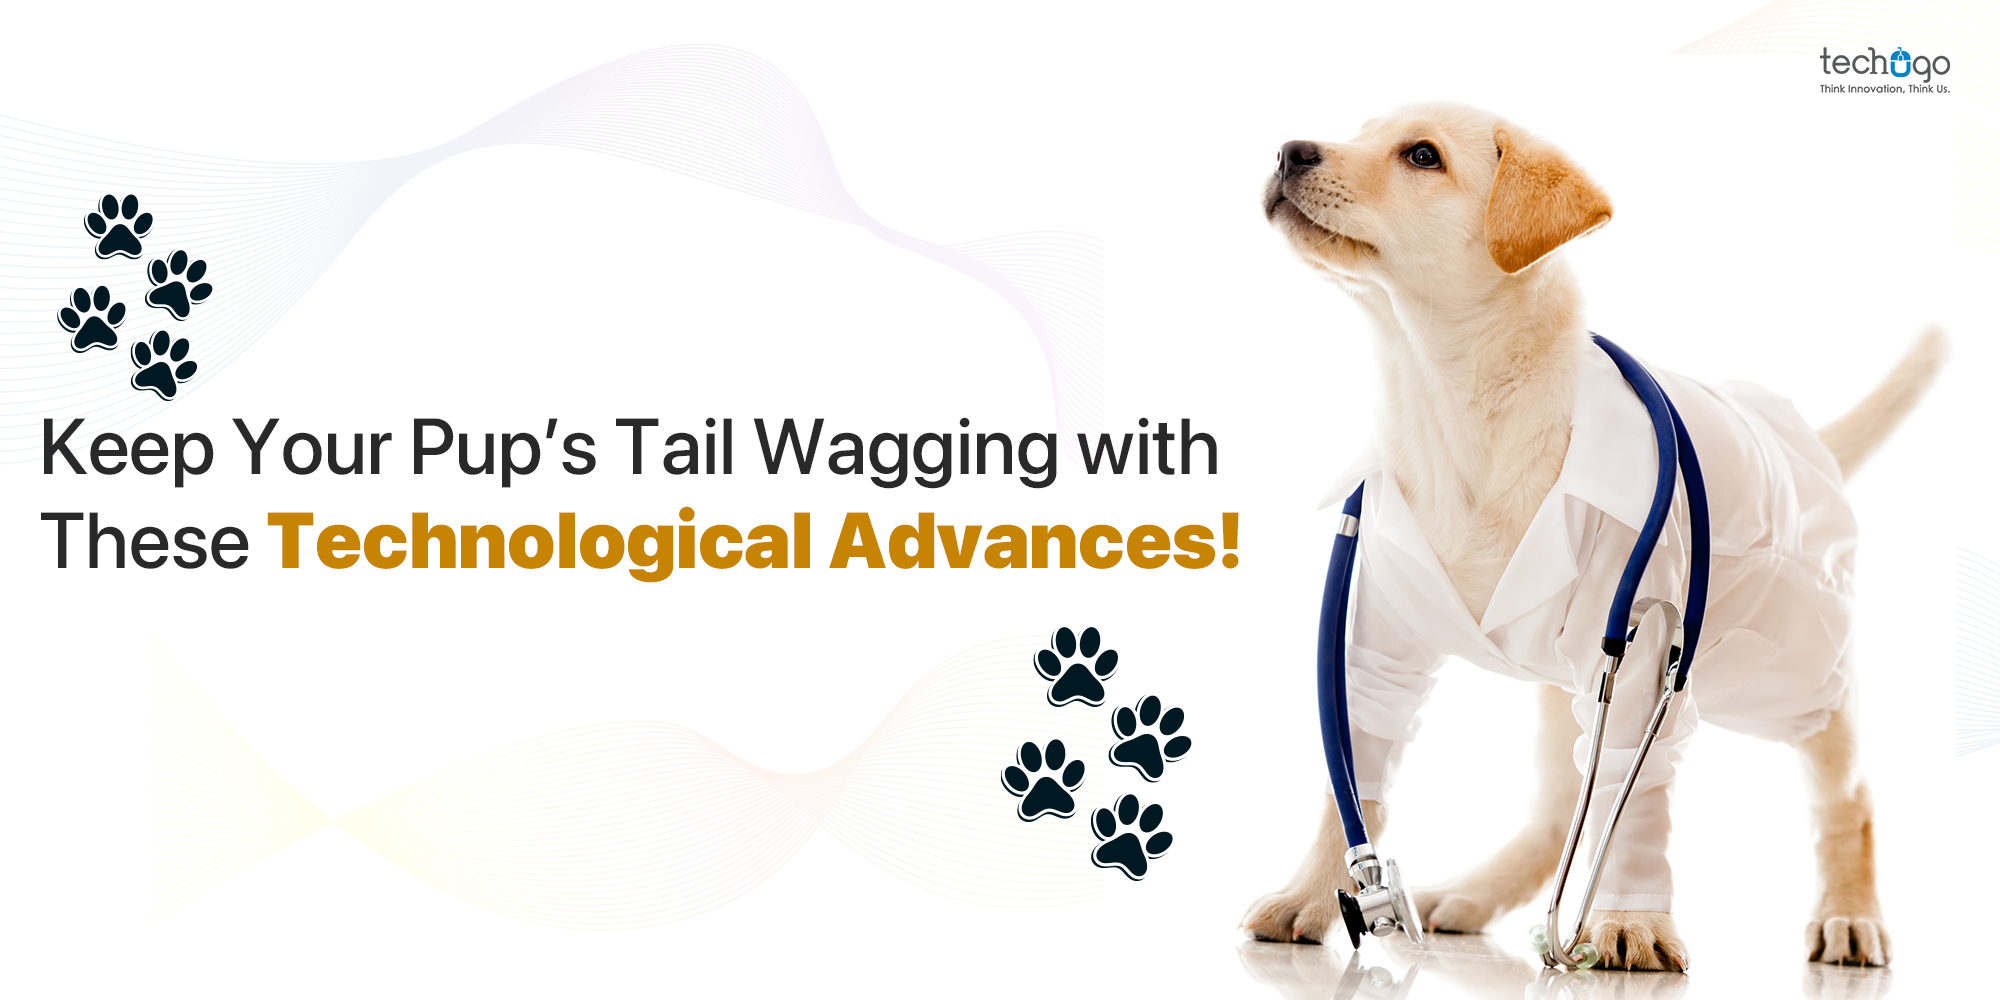 Keep Your Pup’s Tail Wagging with These Technological Advances!